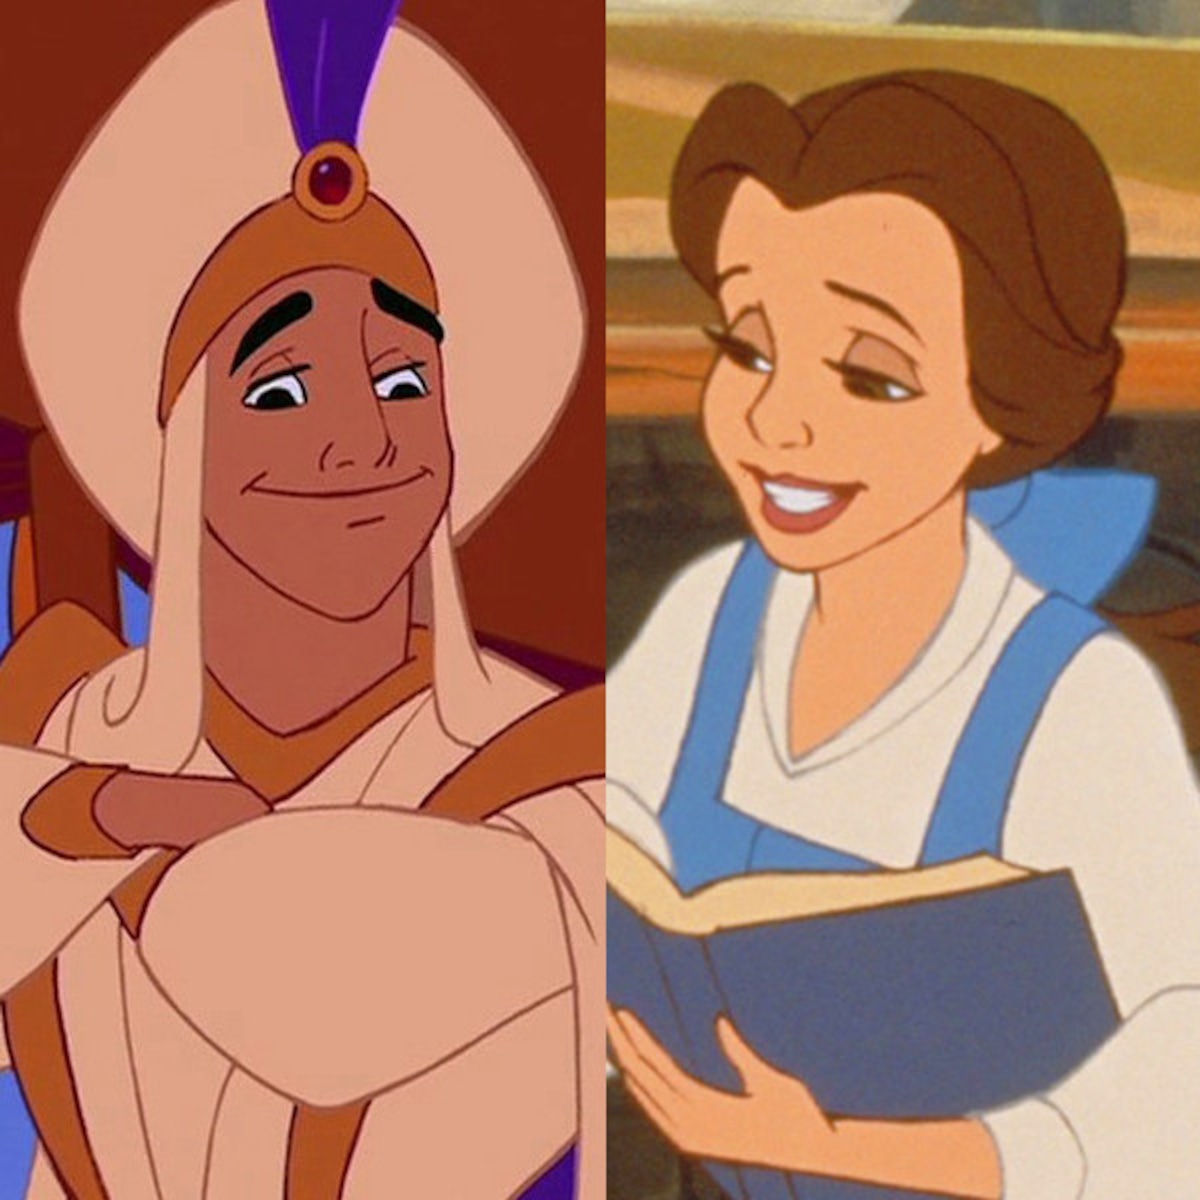 This Disney Theory About Belle and Aladdin Will Blow Your Mind - E! Online